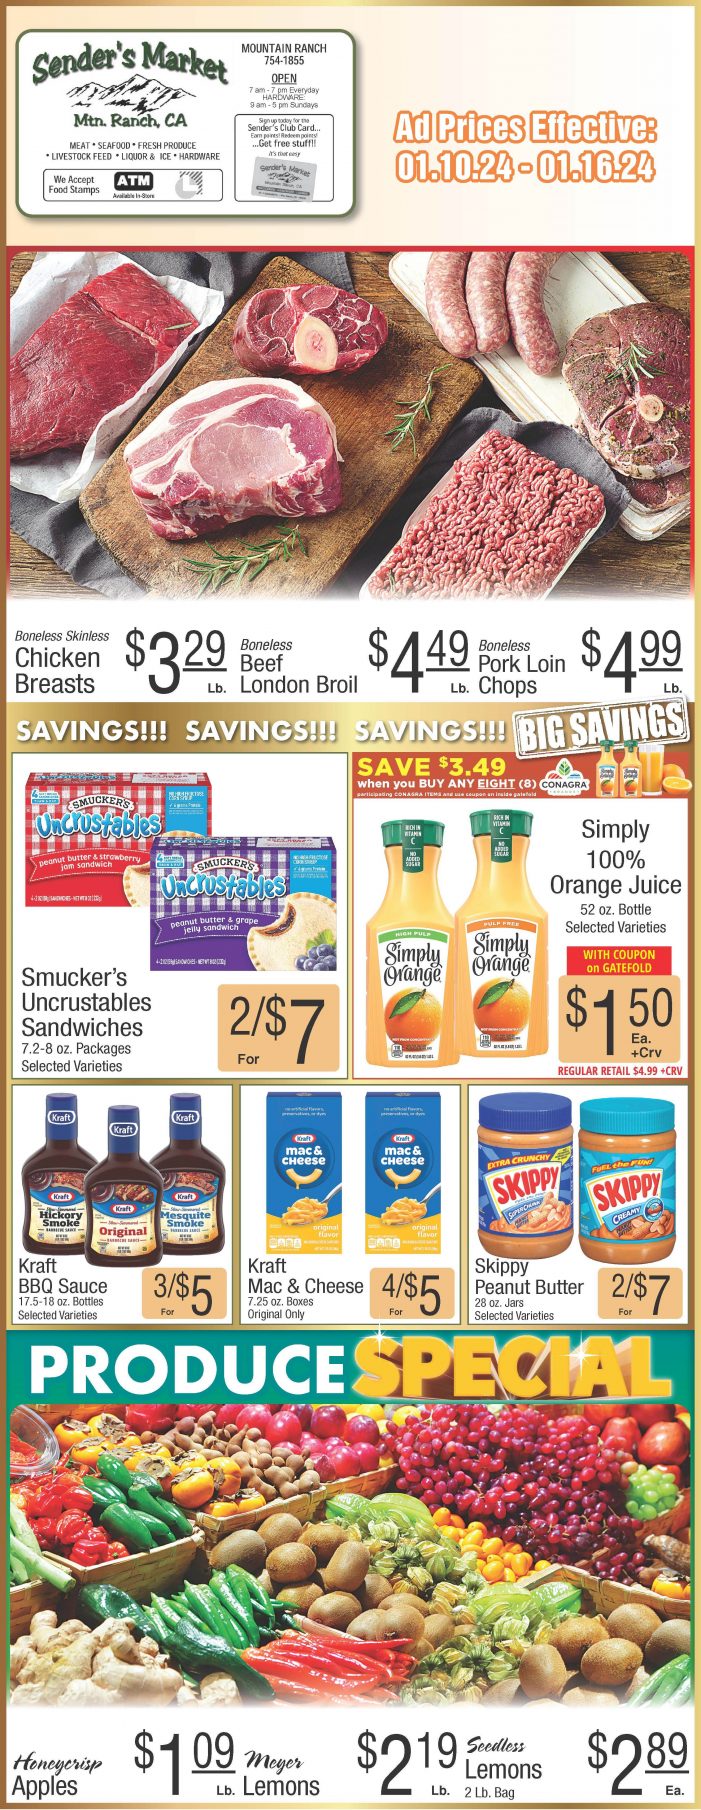 Sender’s Market Weekly Ad & Grocery Specials Through January 16th! Shop Local & Save!!